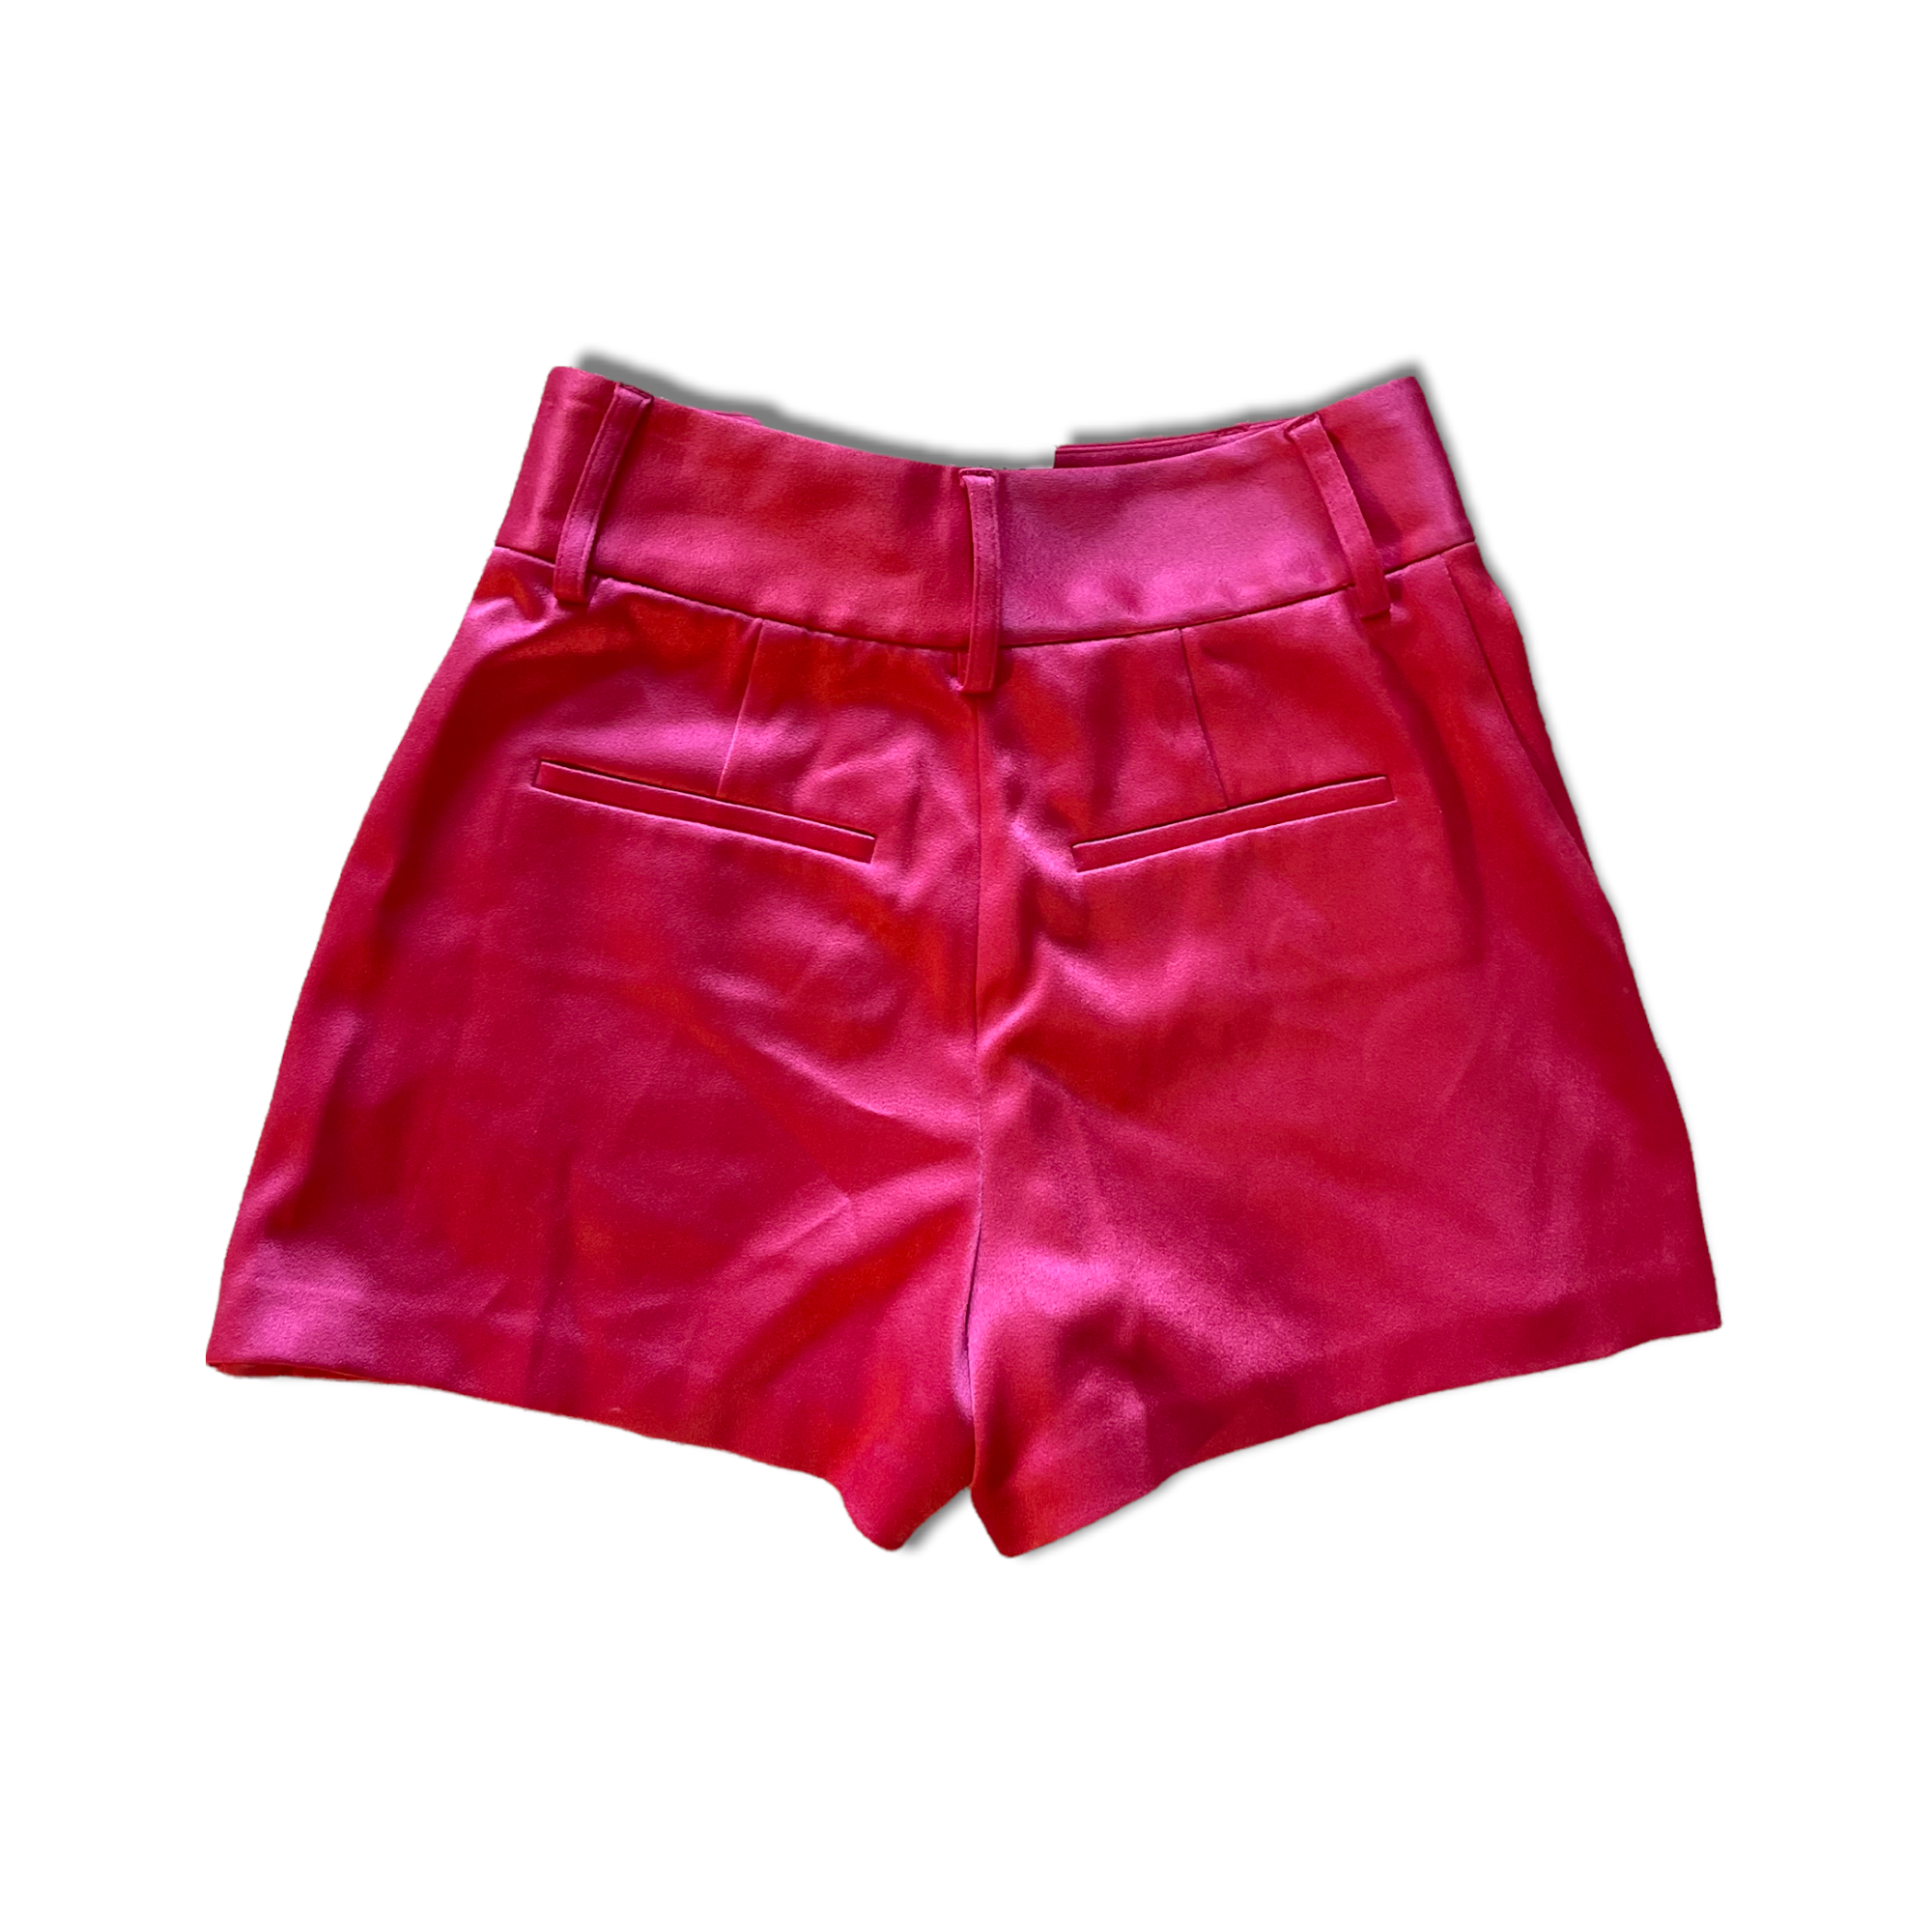 Alice + Olivia Watermelon 🍉 High-Waist & Tailored Fit Shorts |Size: 0|